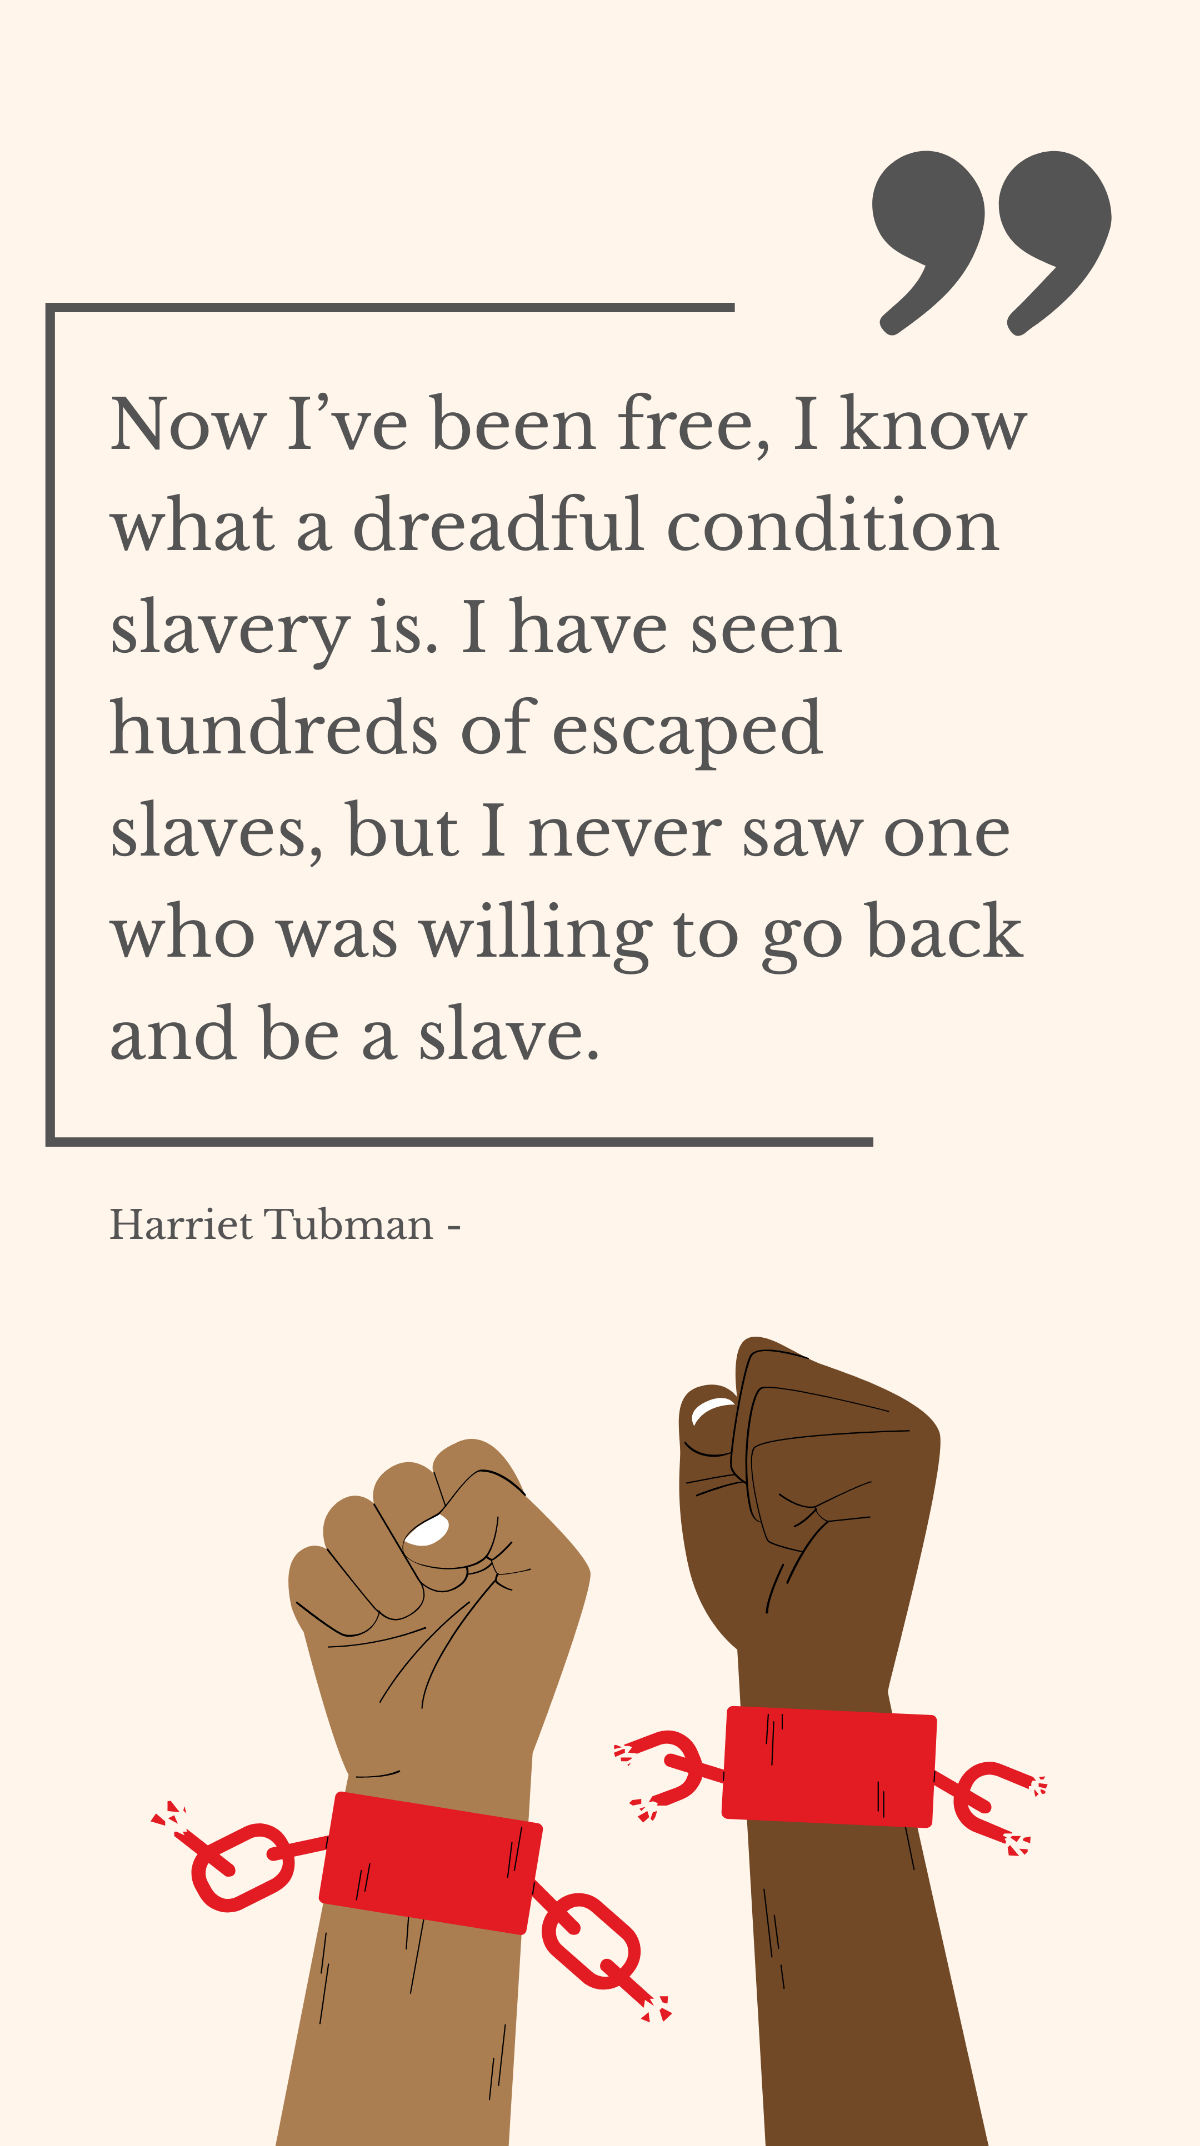 Harriet Tubman - Now I’ve been free, I know what a dreadful condition slavery is. I have seen hundreds of escaped slaves, but I never saw one who was willing to go back and be a slave. Template